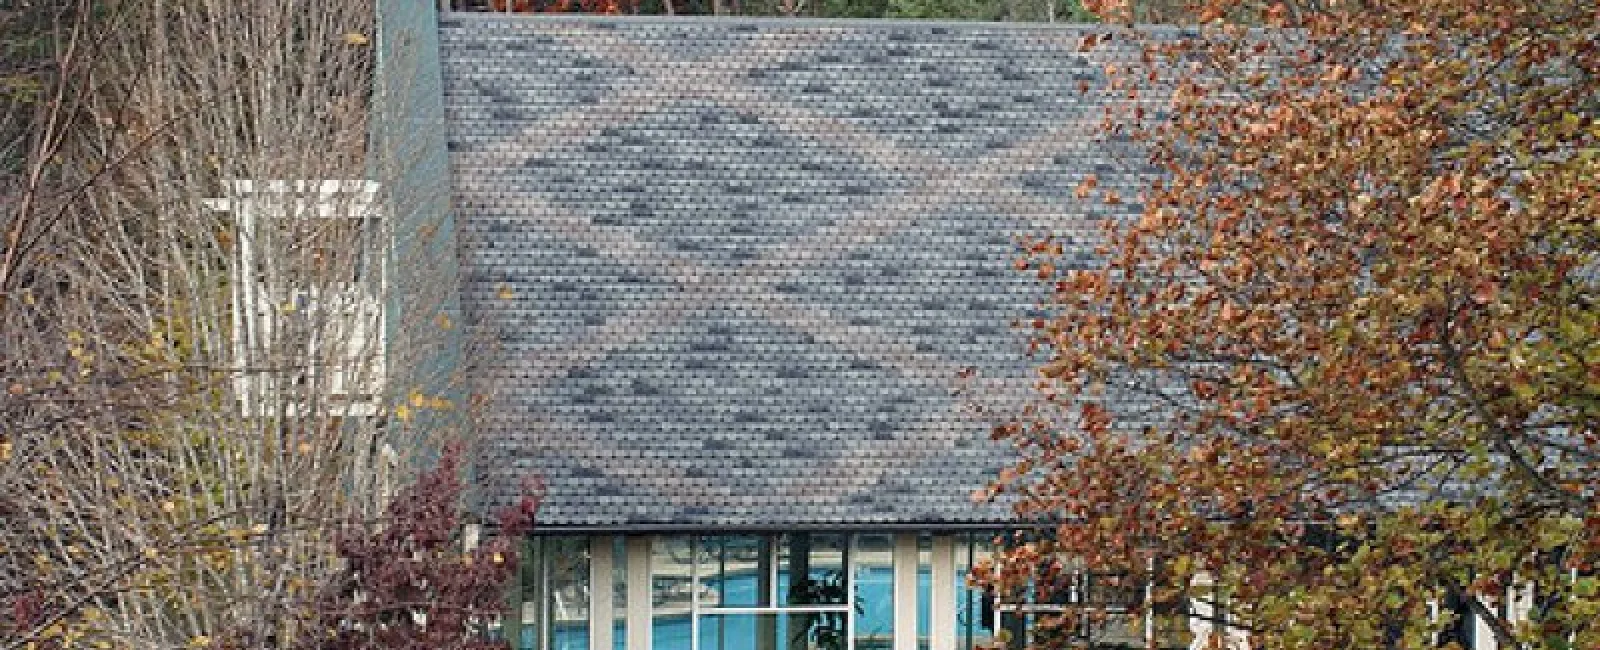 Essential Roof Maintenance: 5 best practices for making a new roof last.